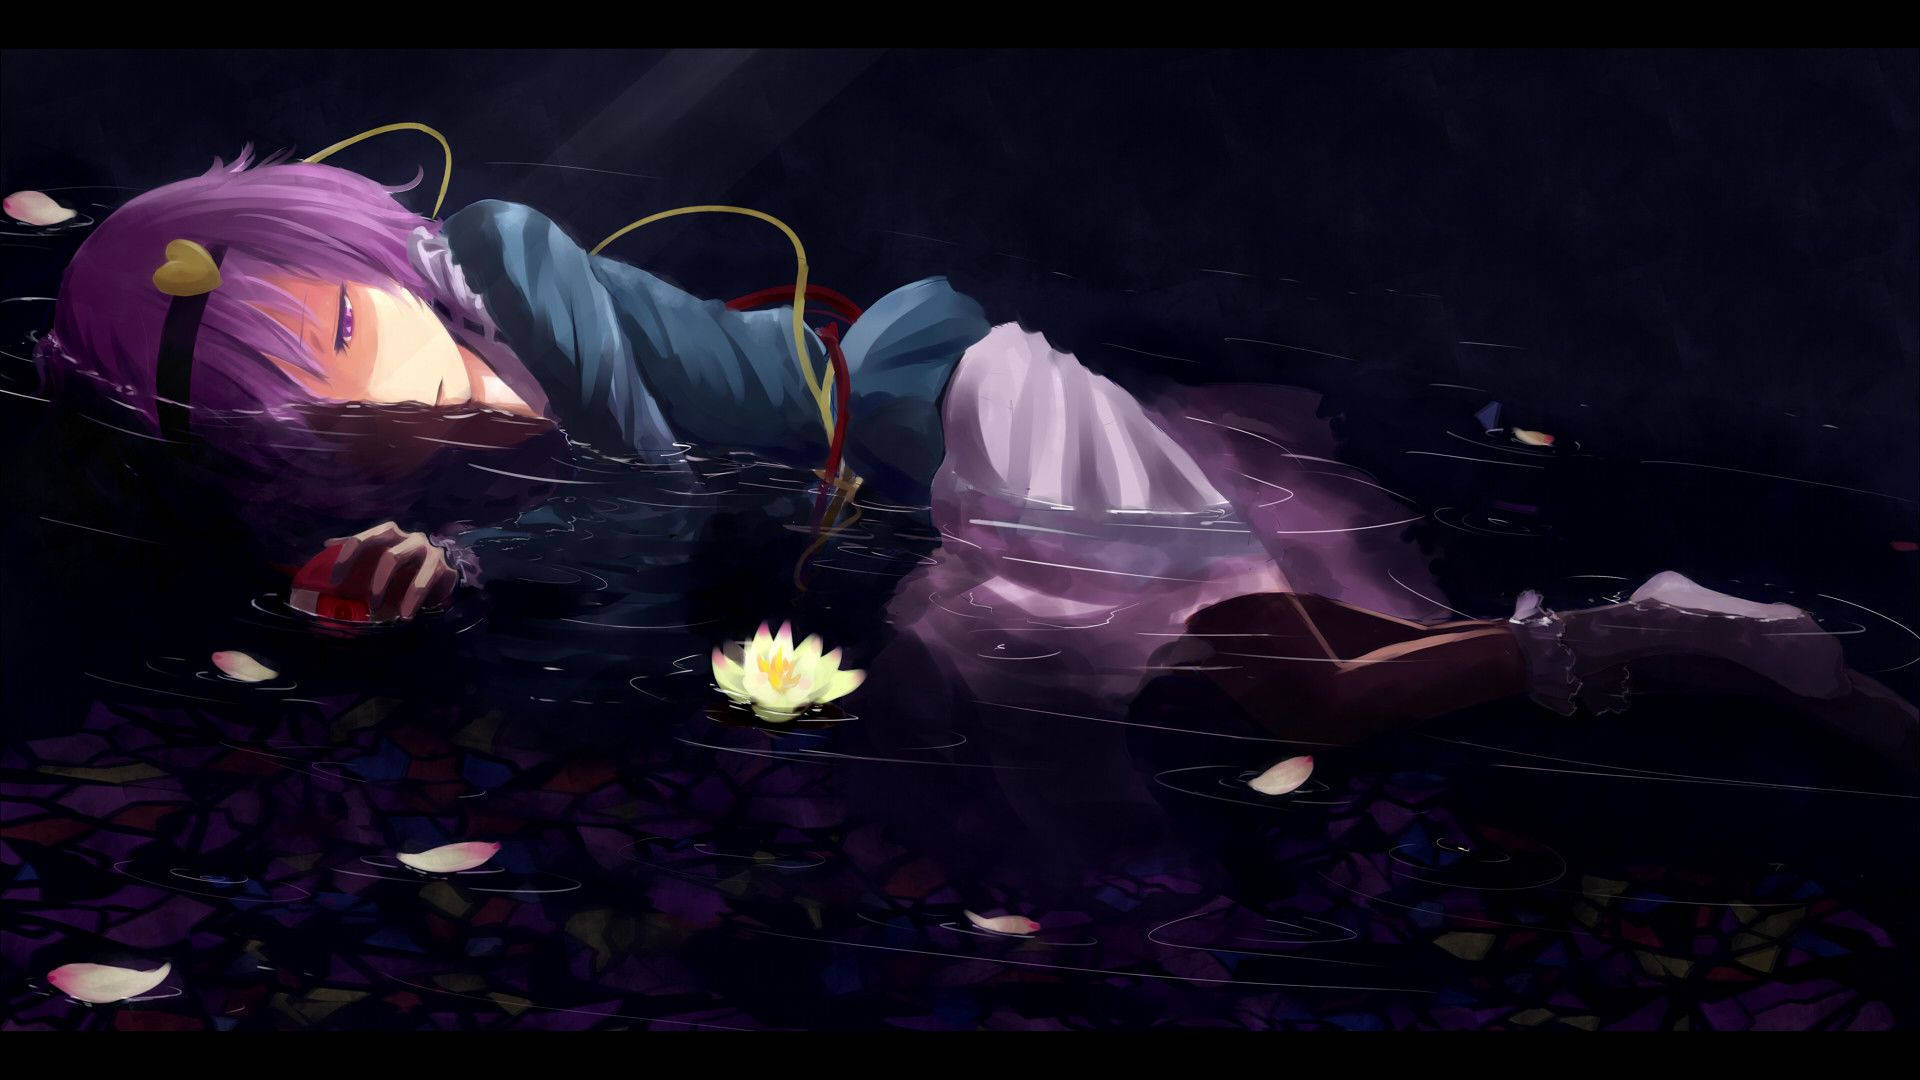 Anime Girl Sad Alone On Water With Flowers Background